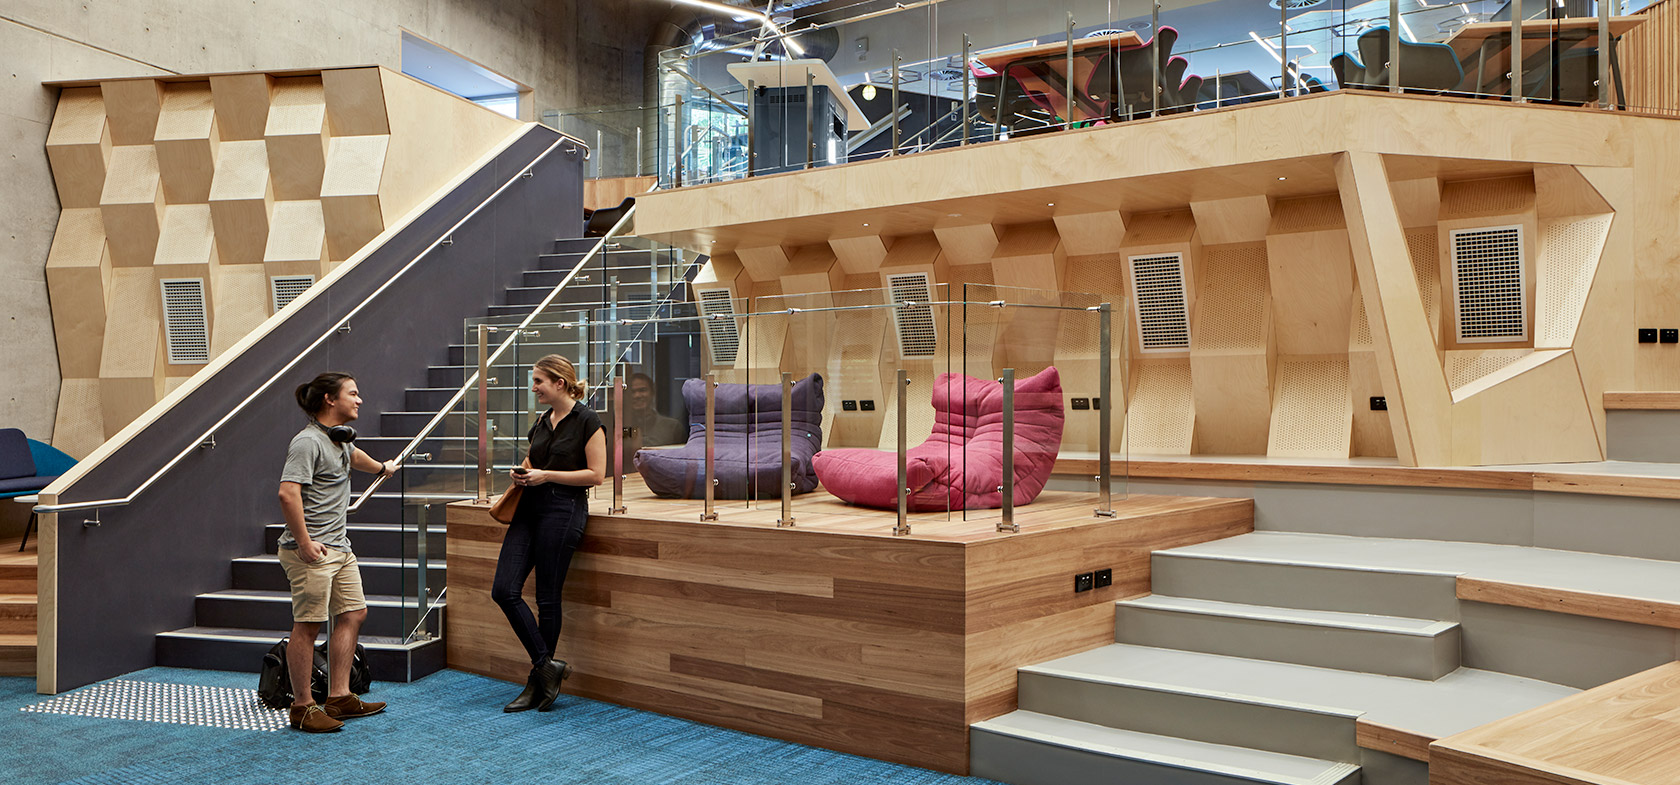 Queensland University of Technology Lecture Theatre Fitout with Students in front of timber joinery